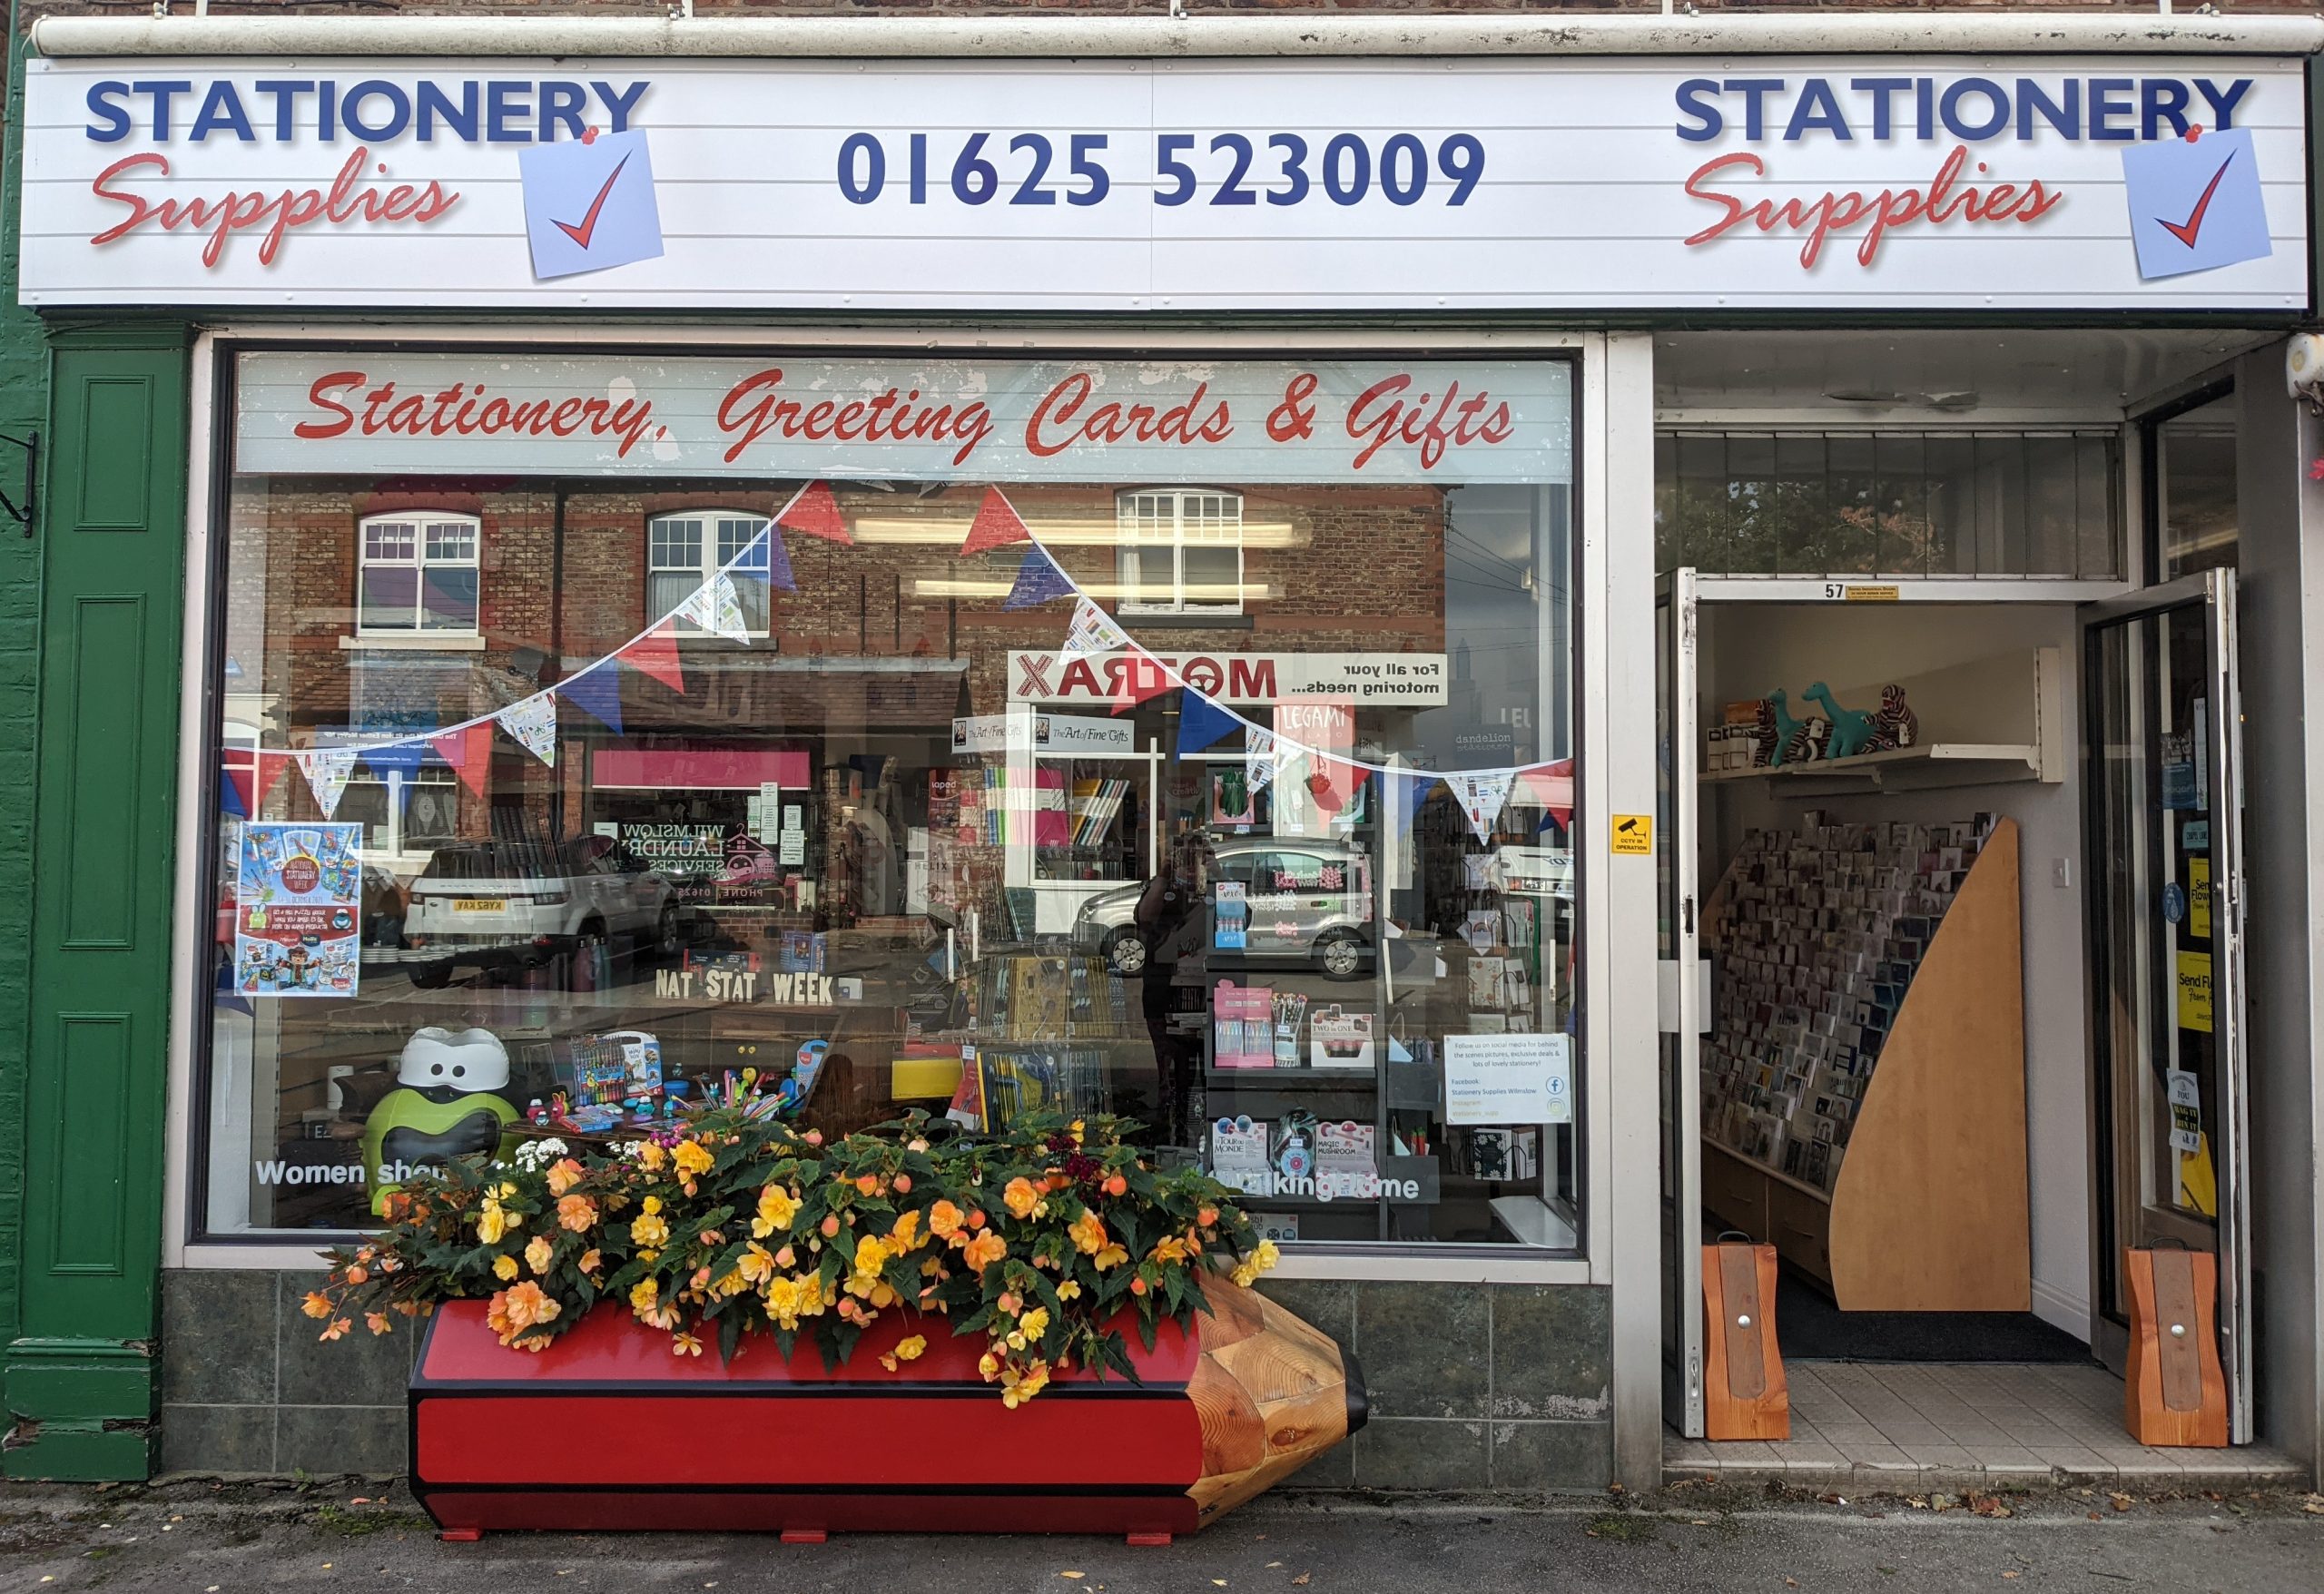 outside of Stationery Supplies Wilmslow